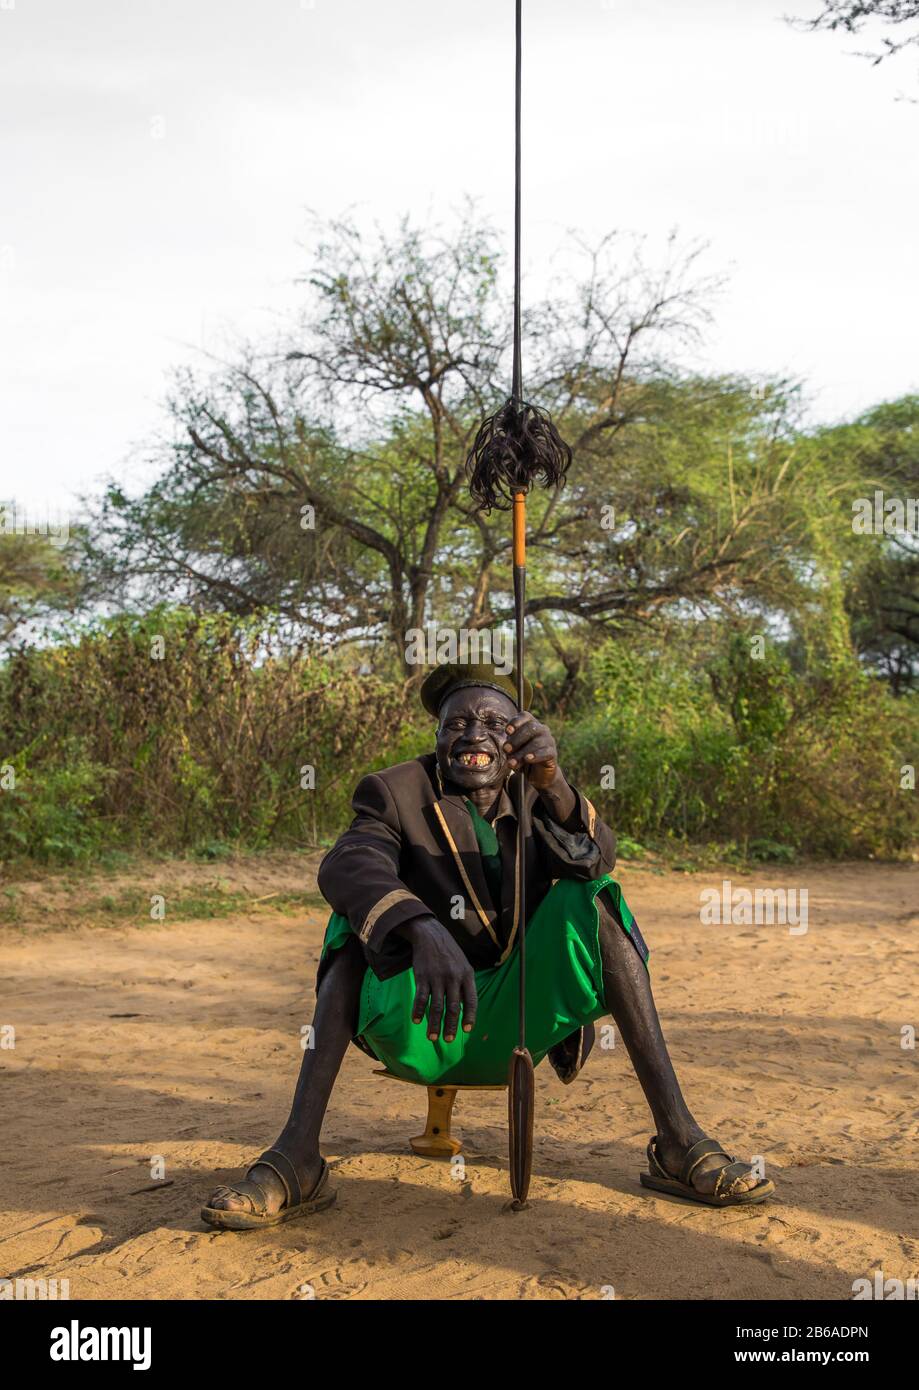 Toposa tribe man sit on a wooden pillow and holding a spear, Namorunyang State, Kapoeta, South Sudan Stock Photo